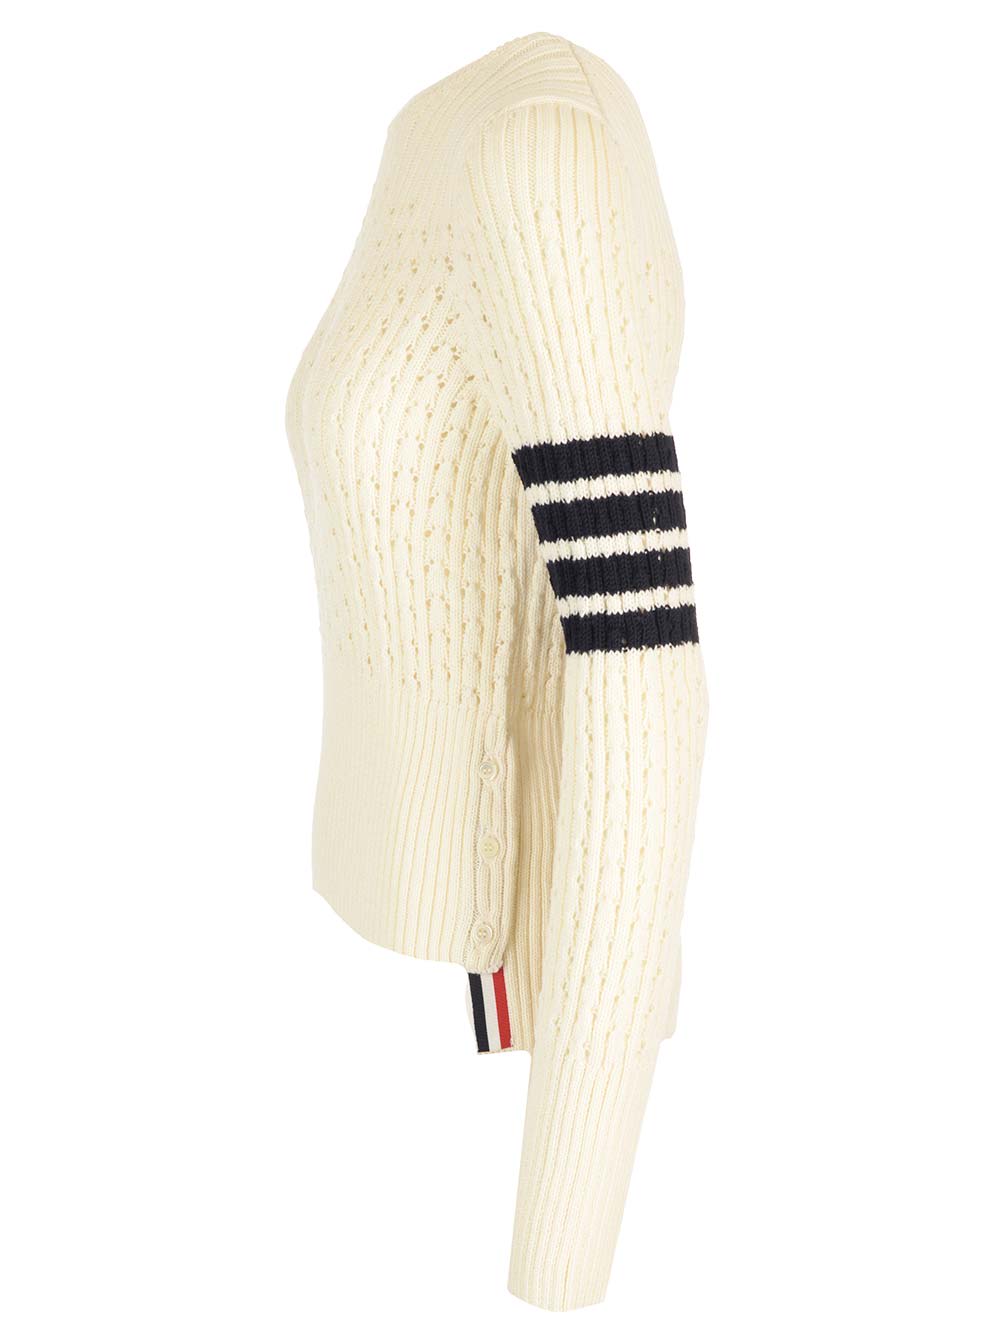 Shop Thom Browne Pointelle Wool Sweater